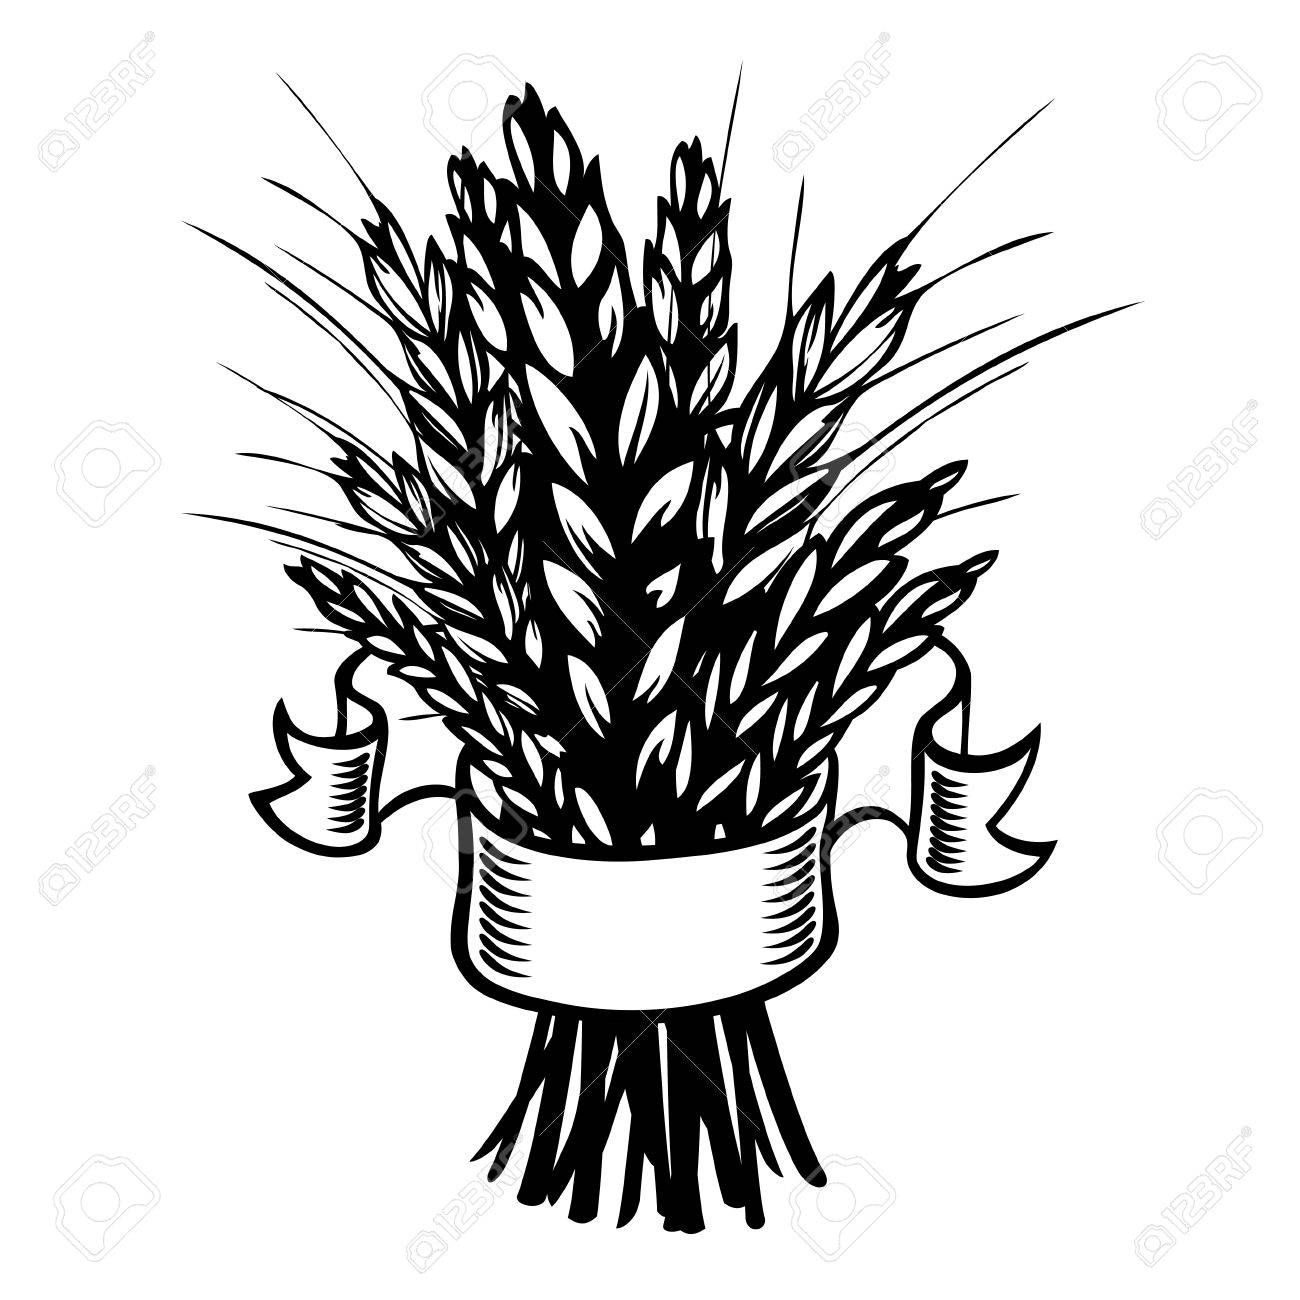 Wheat Clipart Black And White.